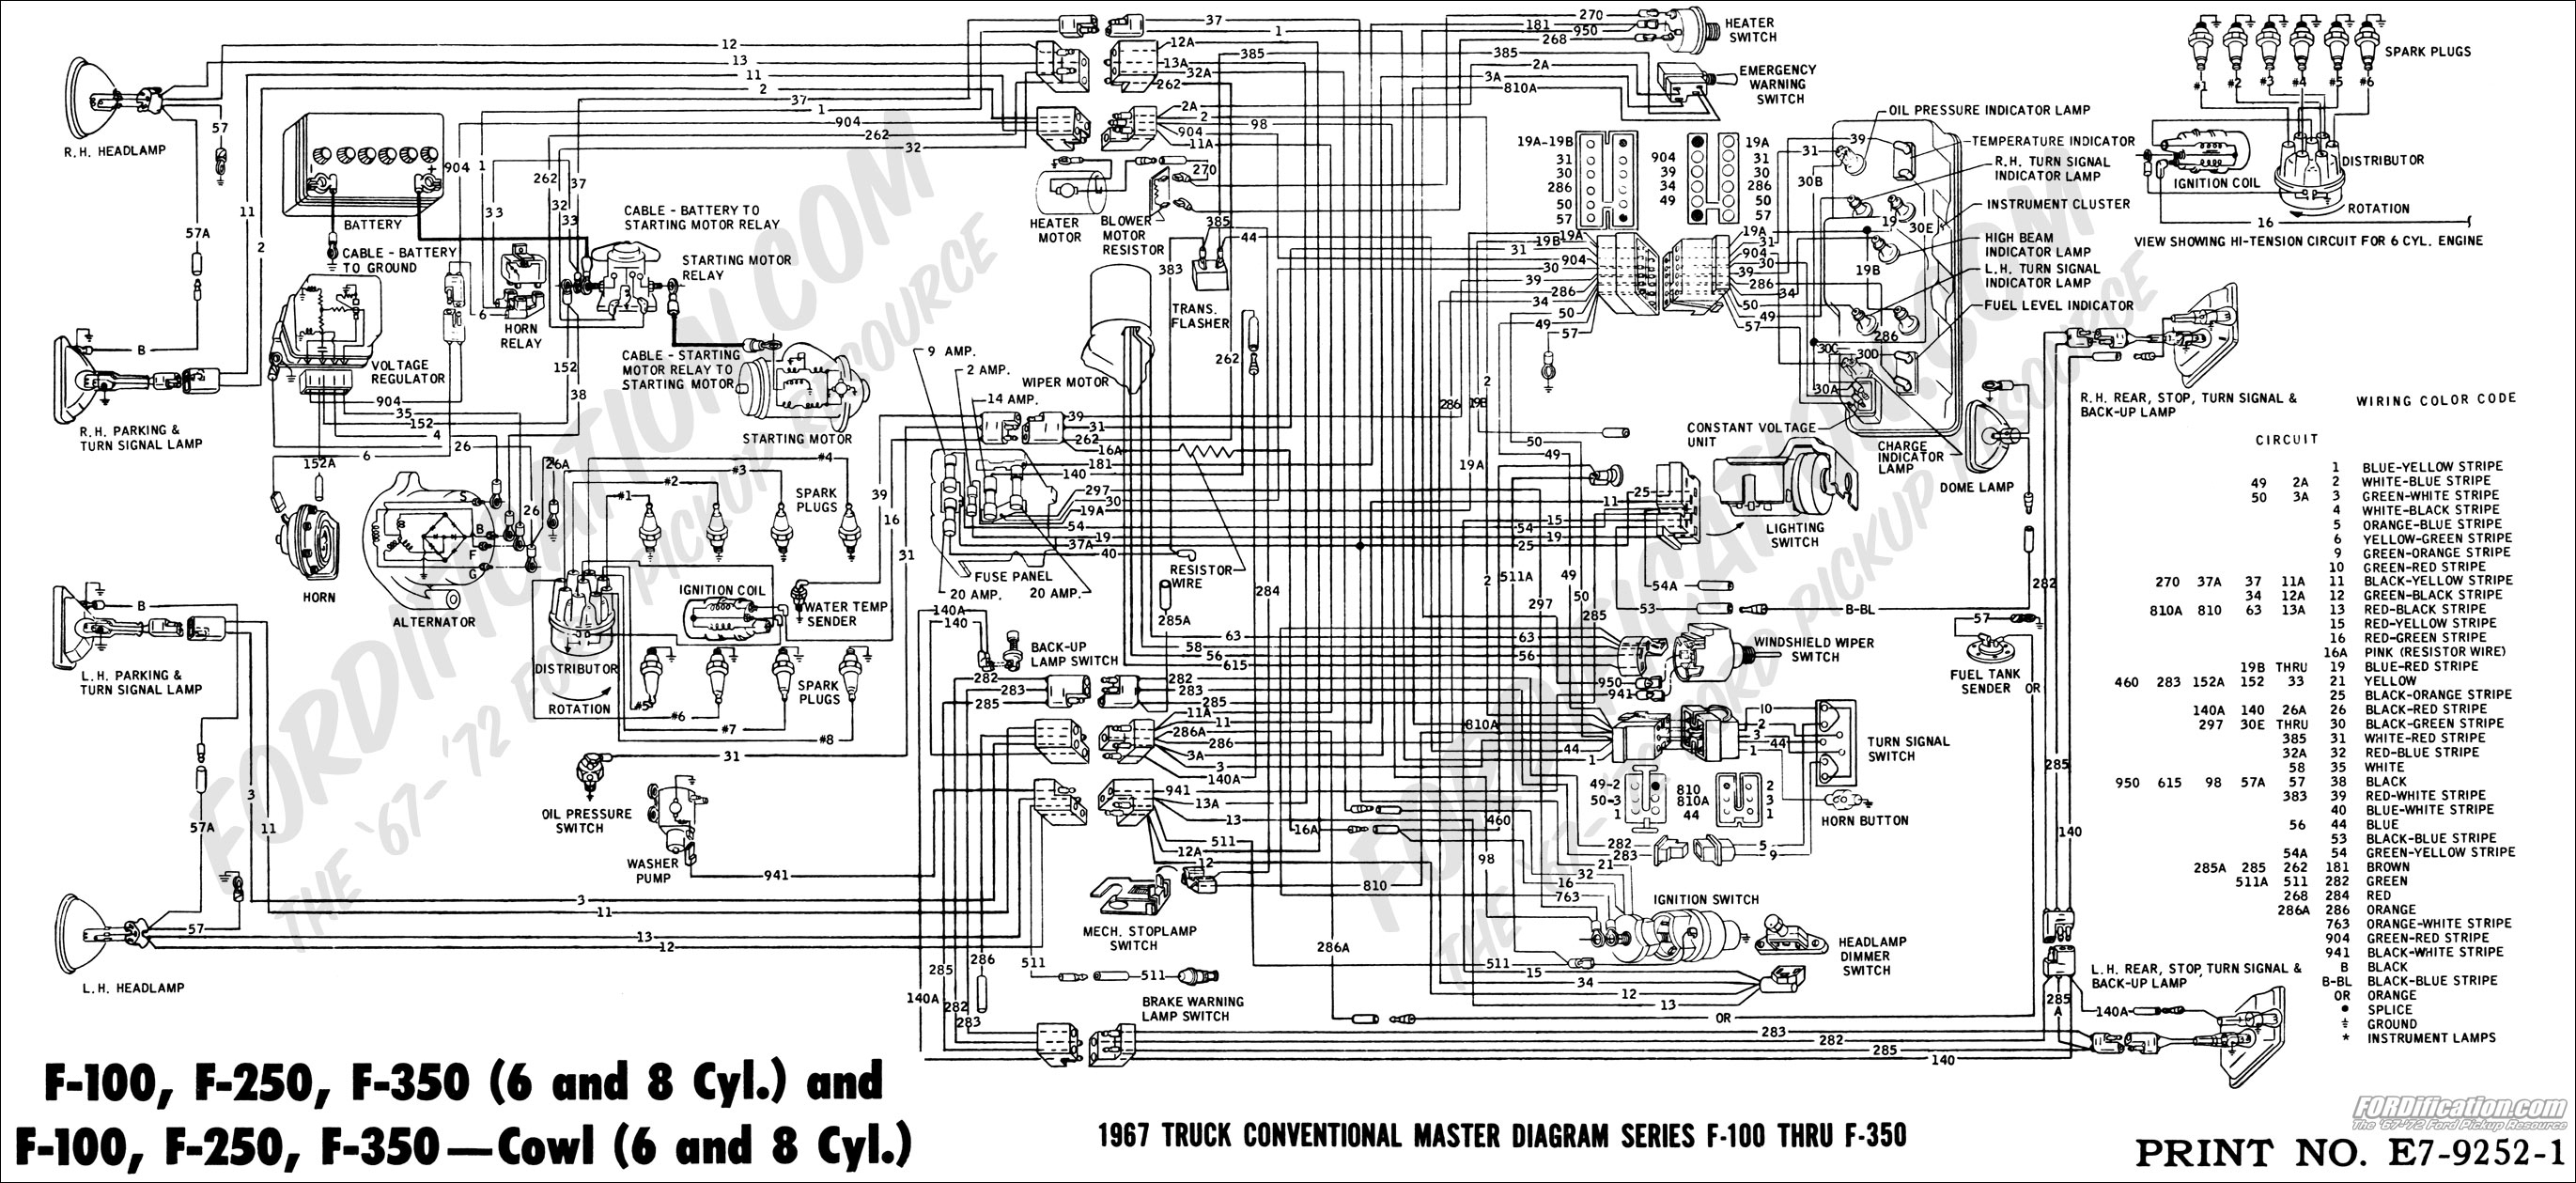 Ford Wire Diagram - Wiring Diagram Data - Ford Wiring Diagram